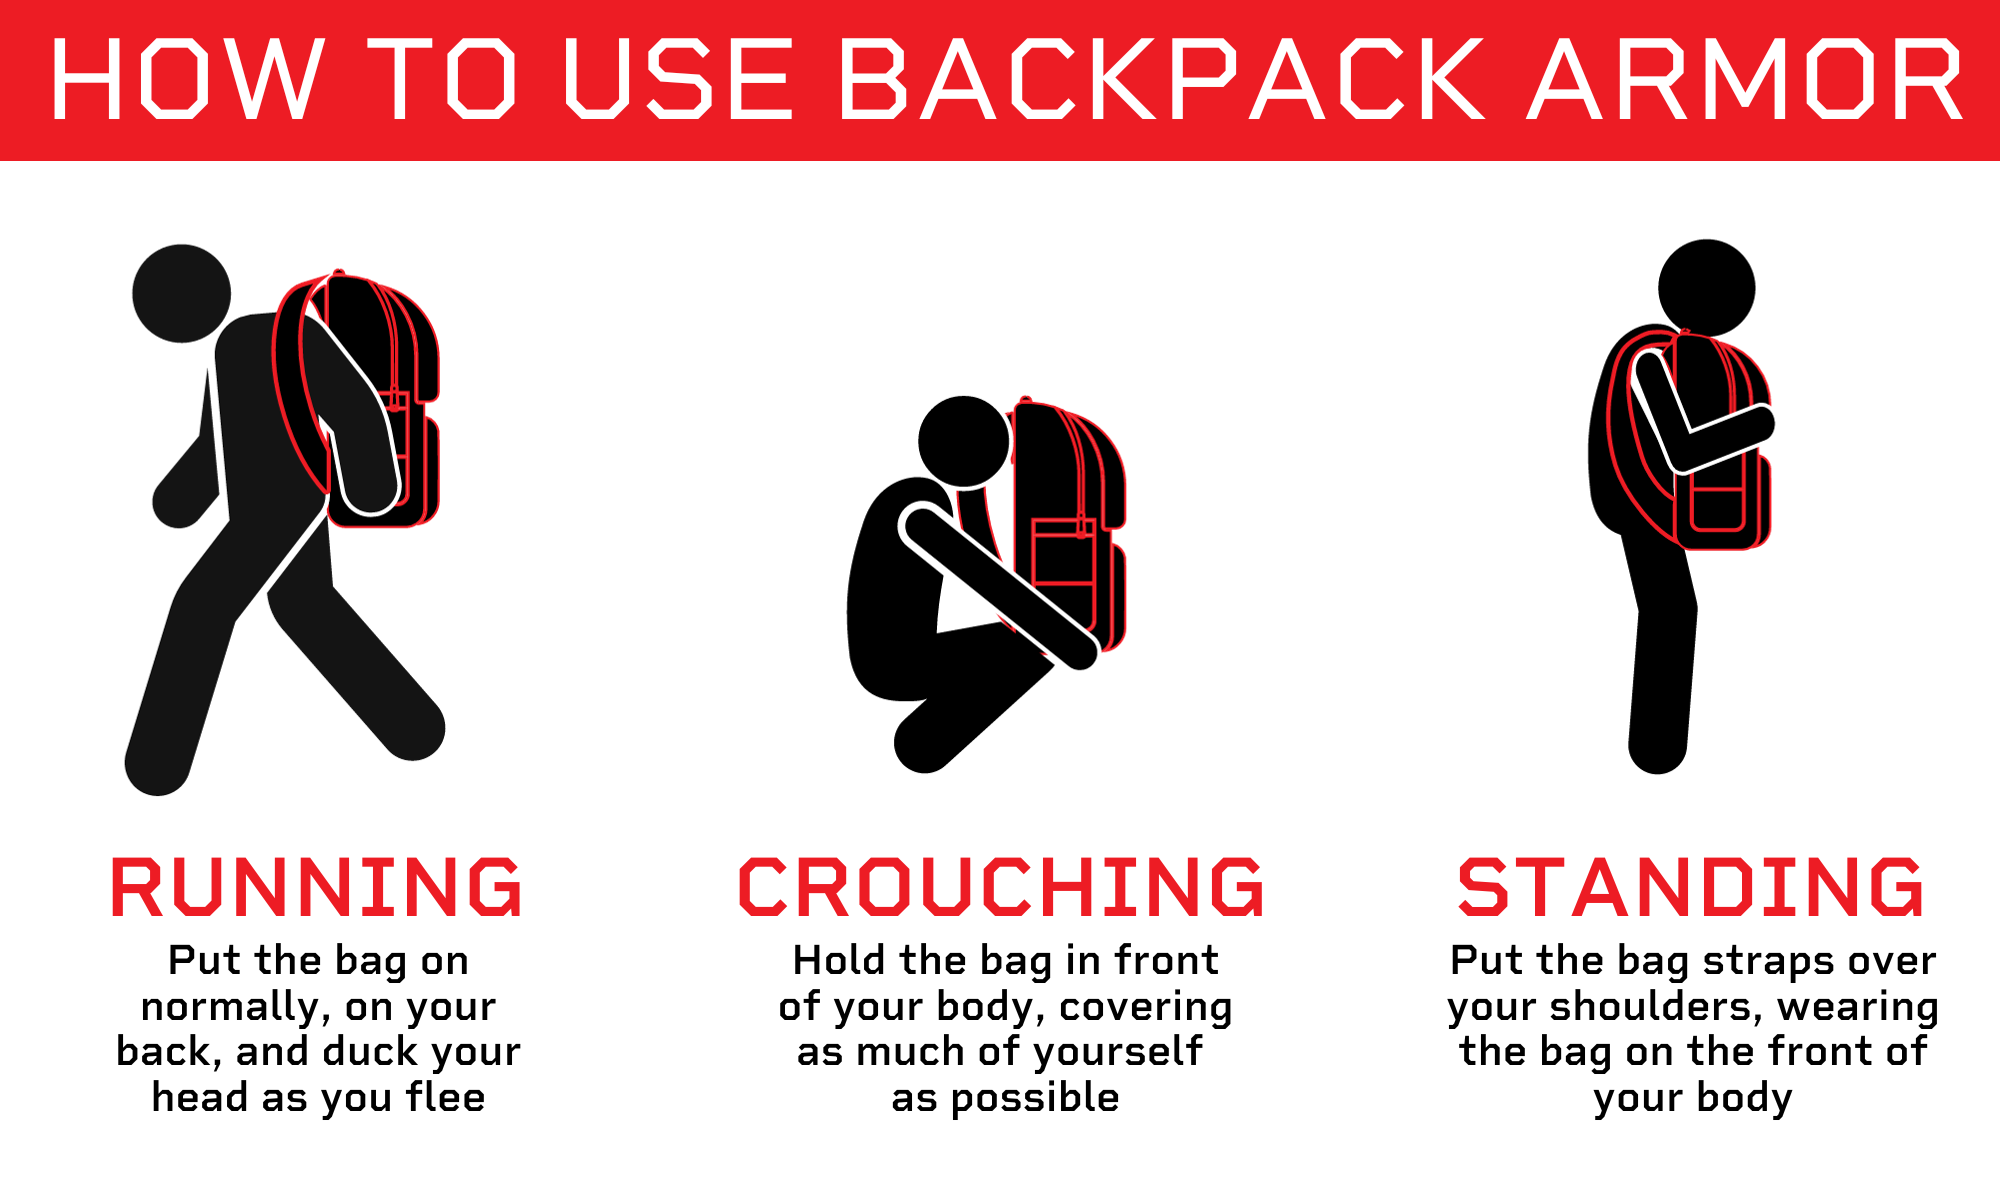 how to use backpack body armor when running, crouching, or standing